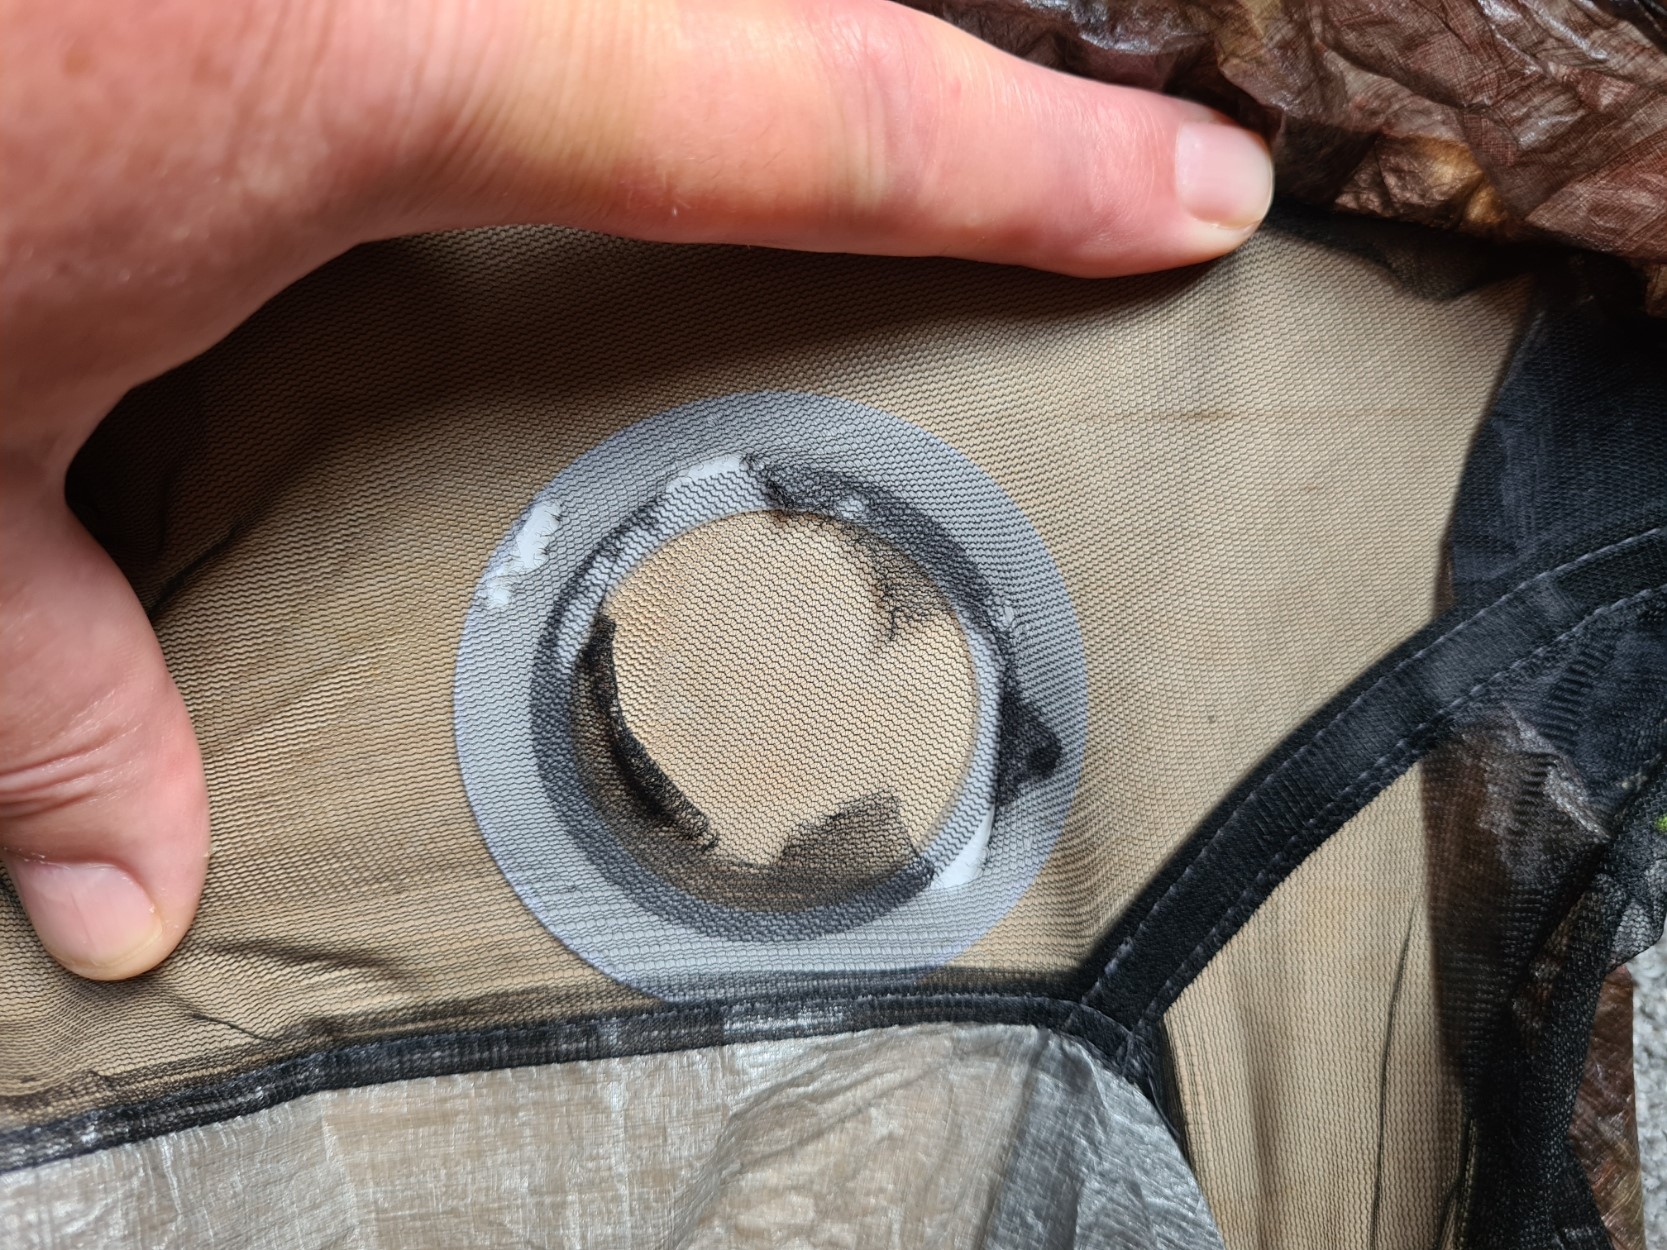 Offering unpeeled mesh patch to holes prior to starting